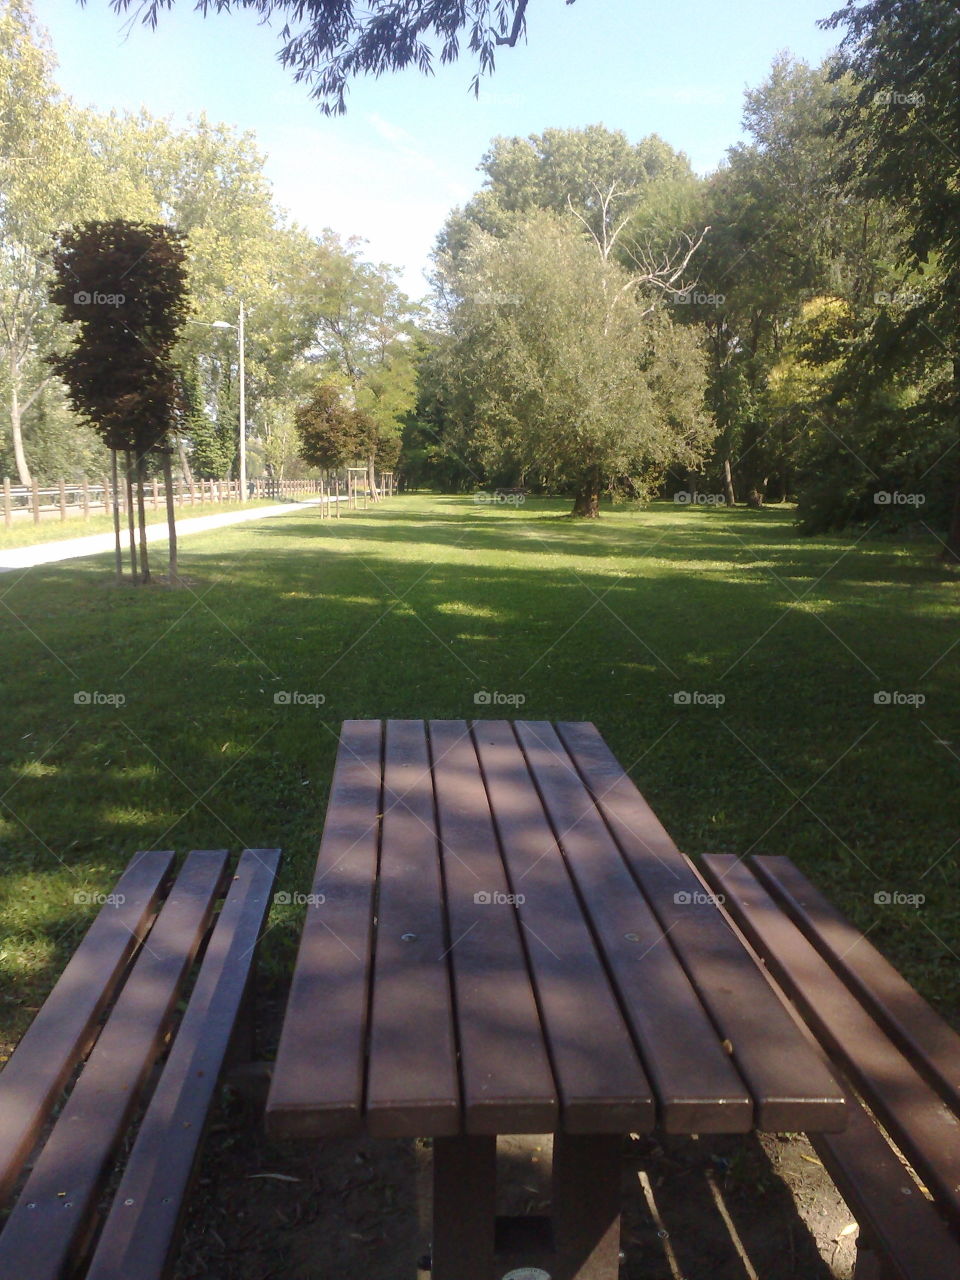 garden park, benches, trees and grass